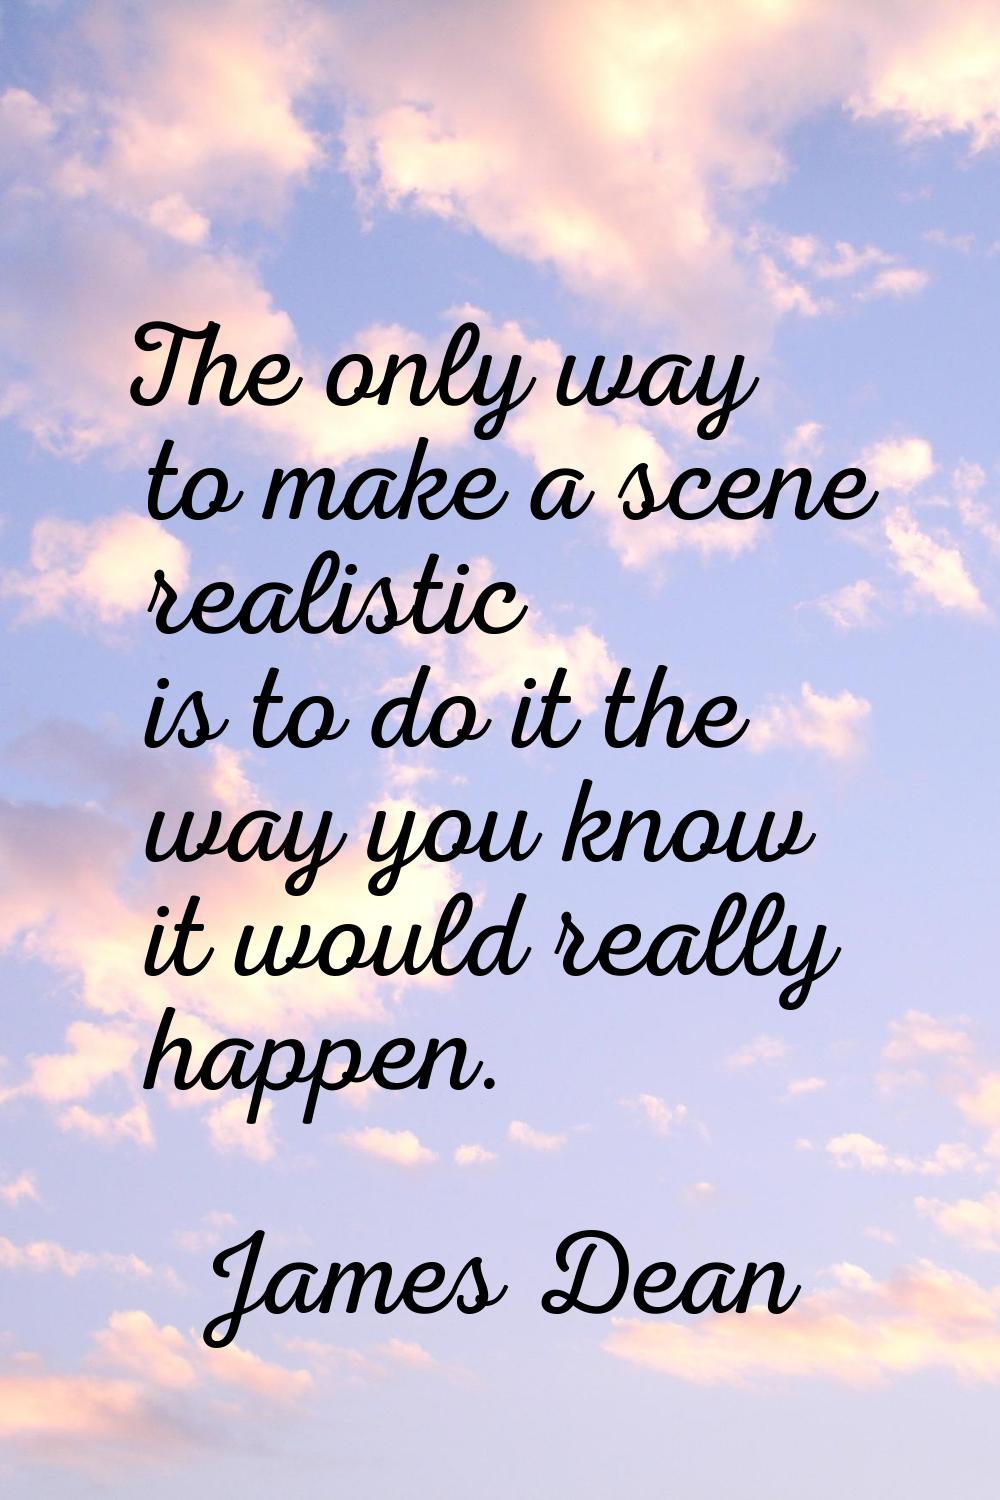 The only way to make a scene realistic is to do it the way you know it would really happen.